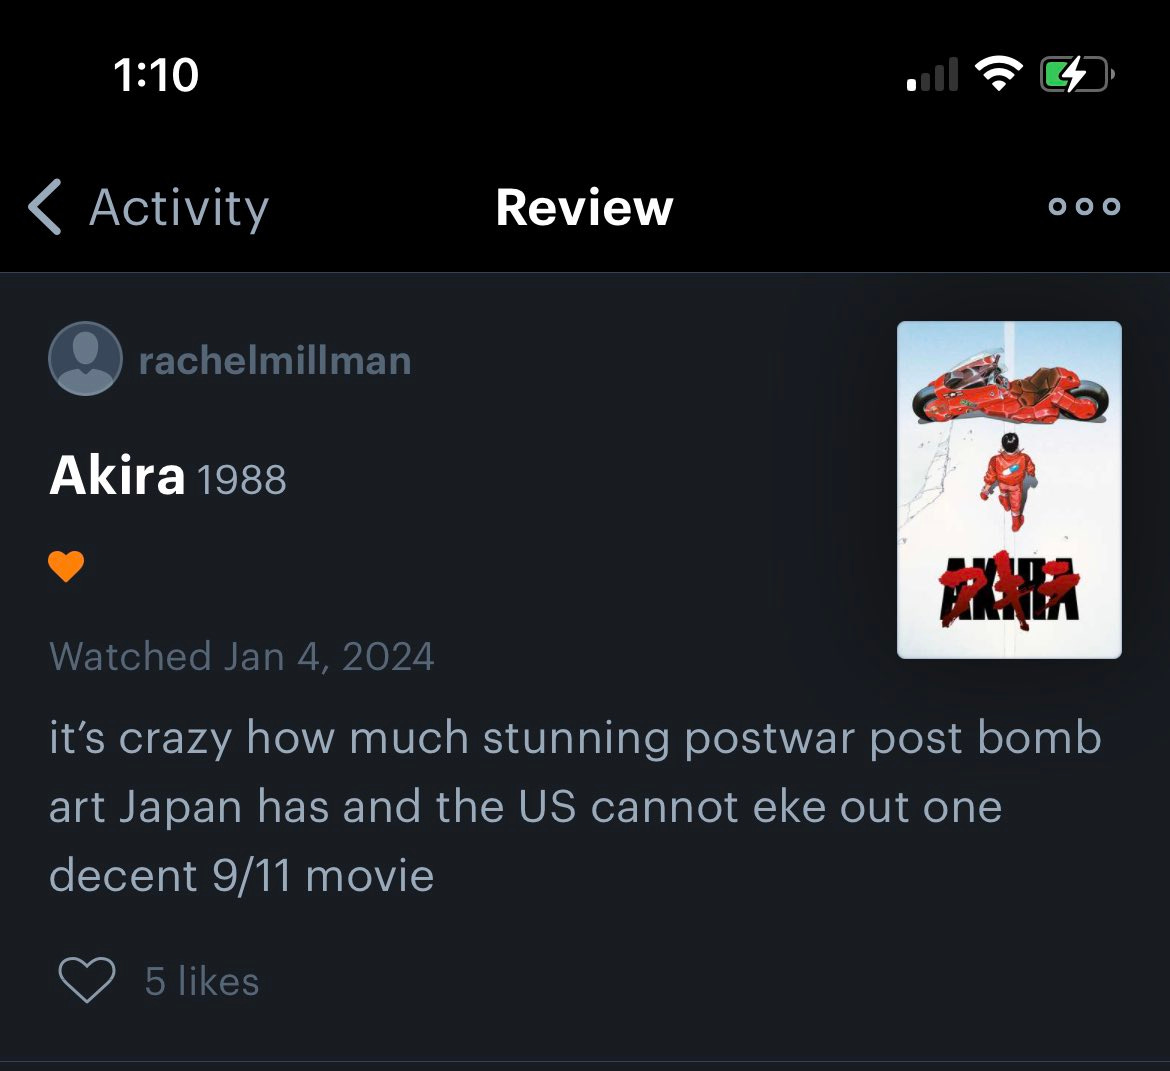 Rachel Millman's Letterboxd review of 'Akira': "it’s crazy how much stunning postwar post bomb art Japan has and the US cannot eke out one decent 9/11 movie"